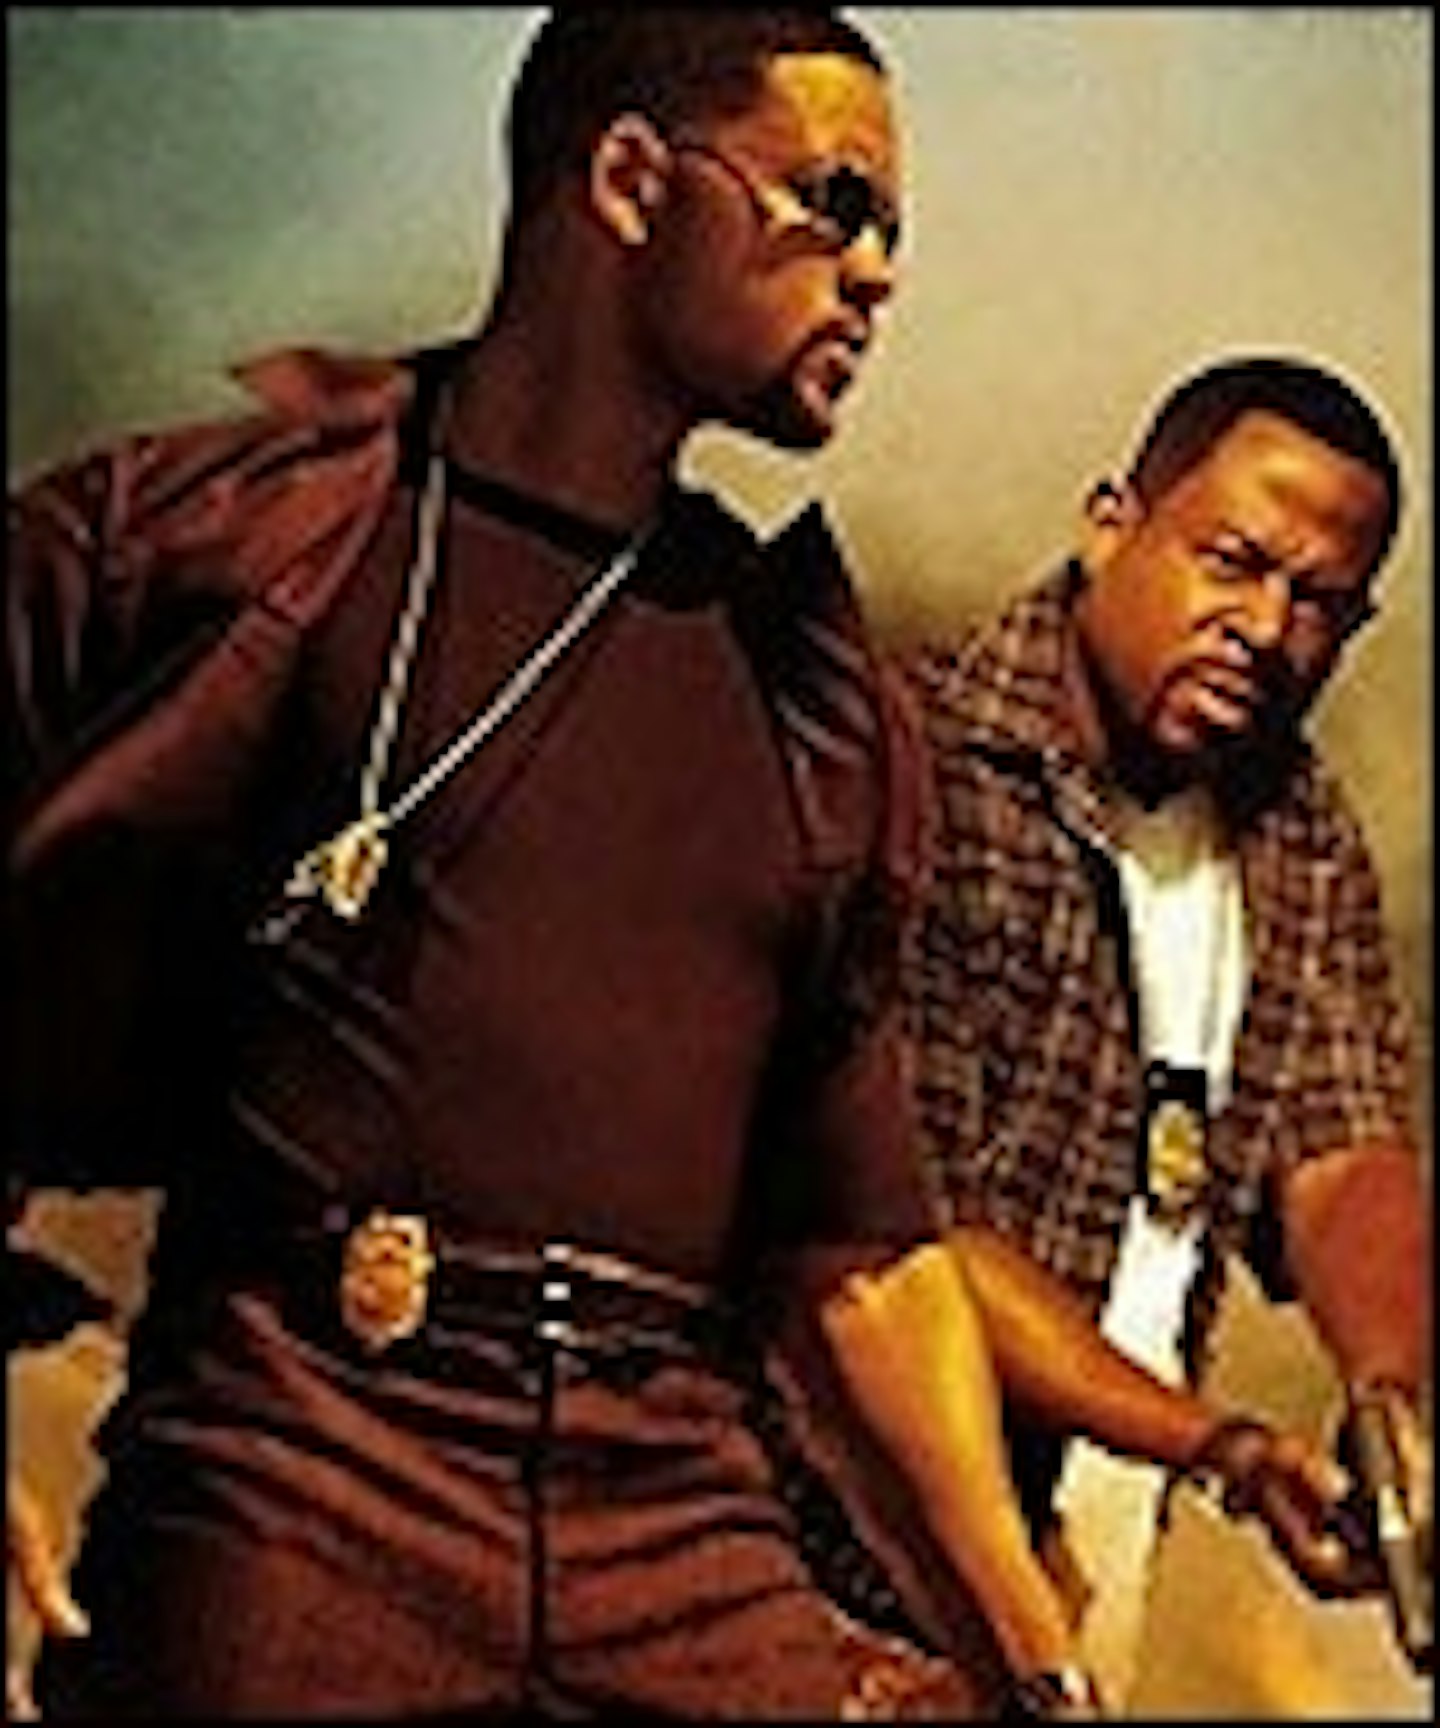 Get Ready For Bad Boys 3